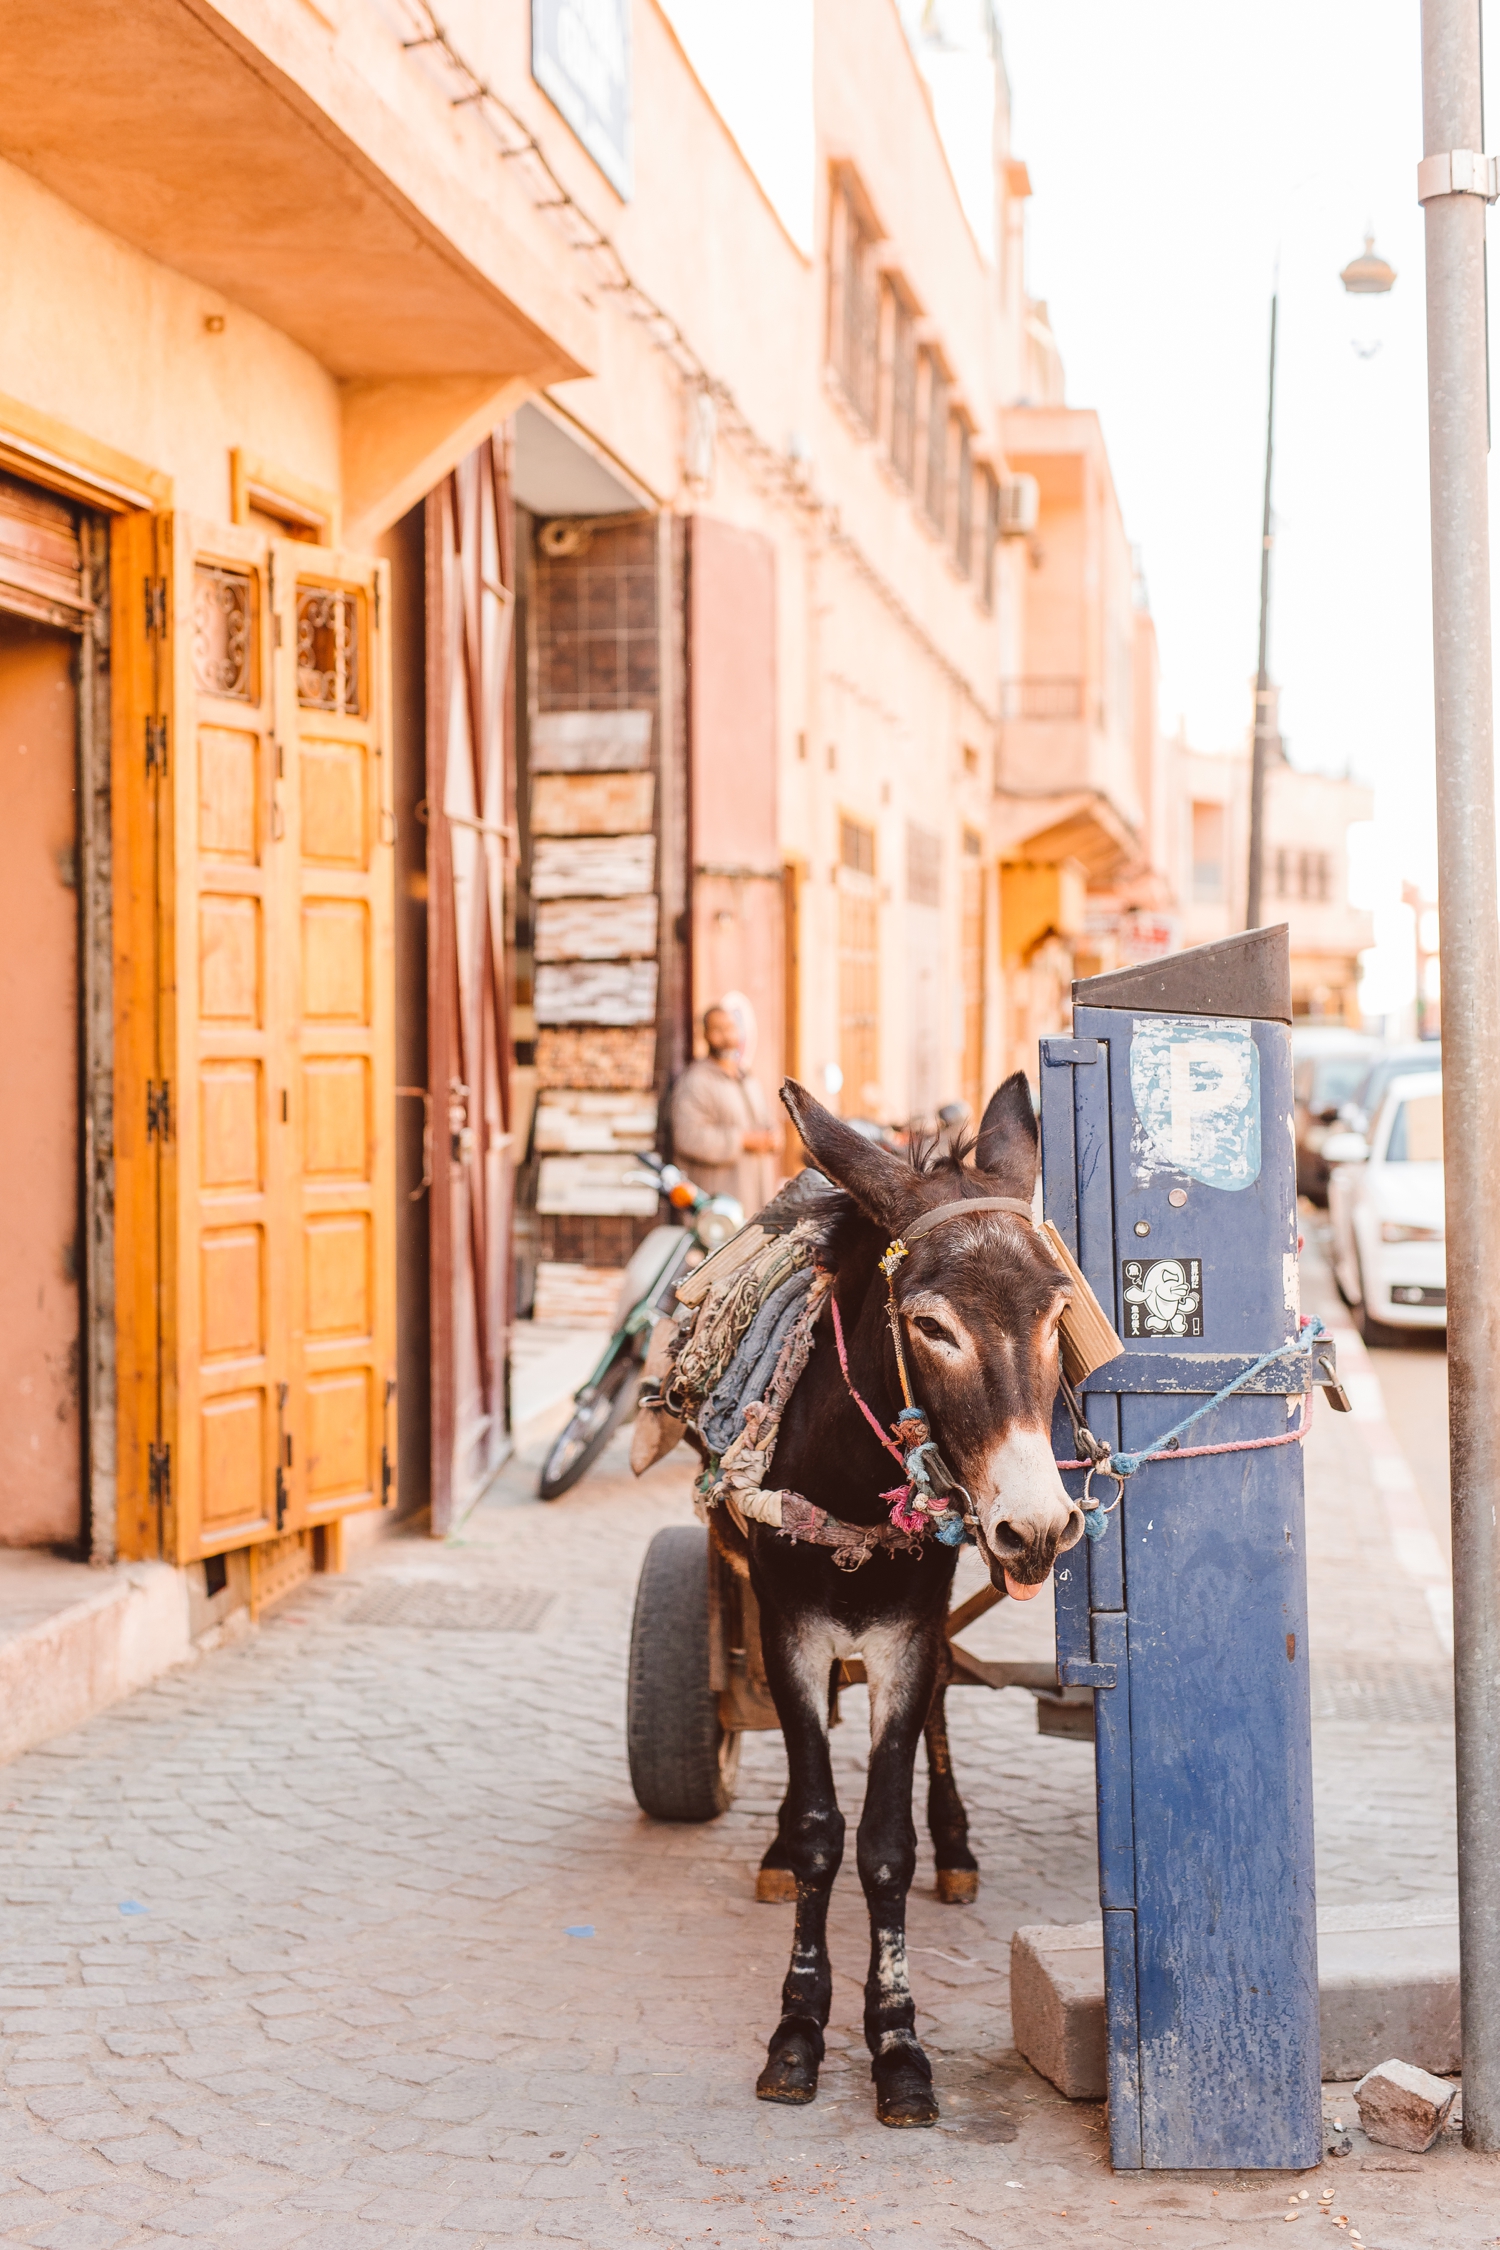 Donkey with cart attached to it in streets of Marrakesh, Morocco | Brooke Michelle Photography